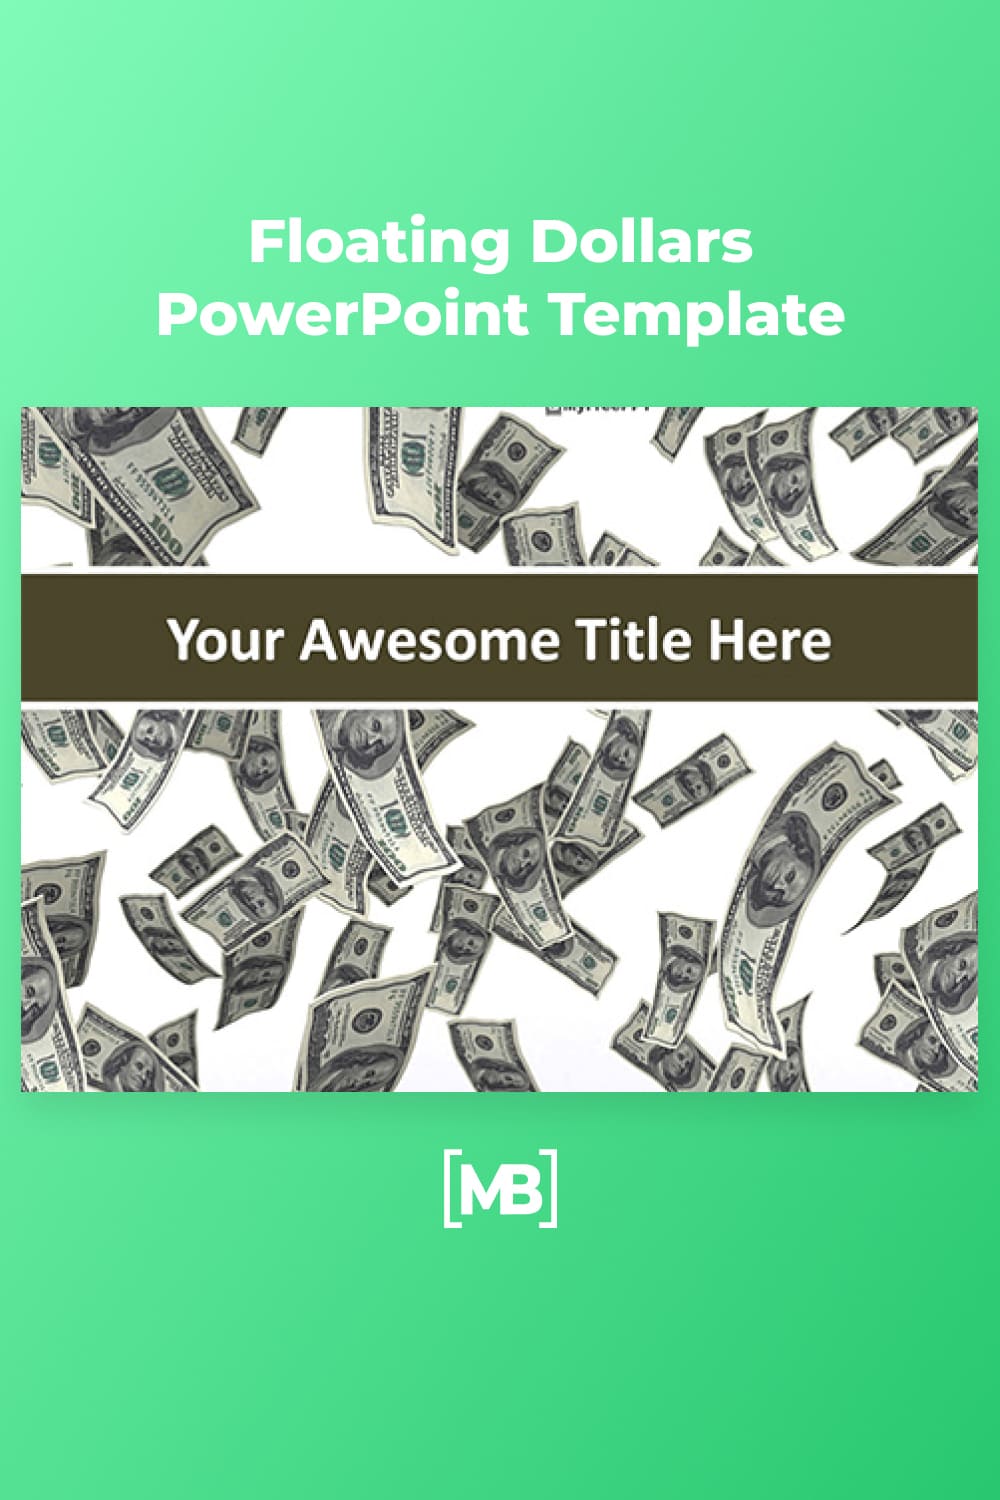 Floating dollars powerpoint template.